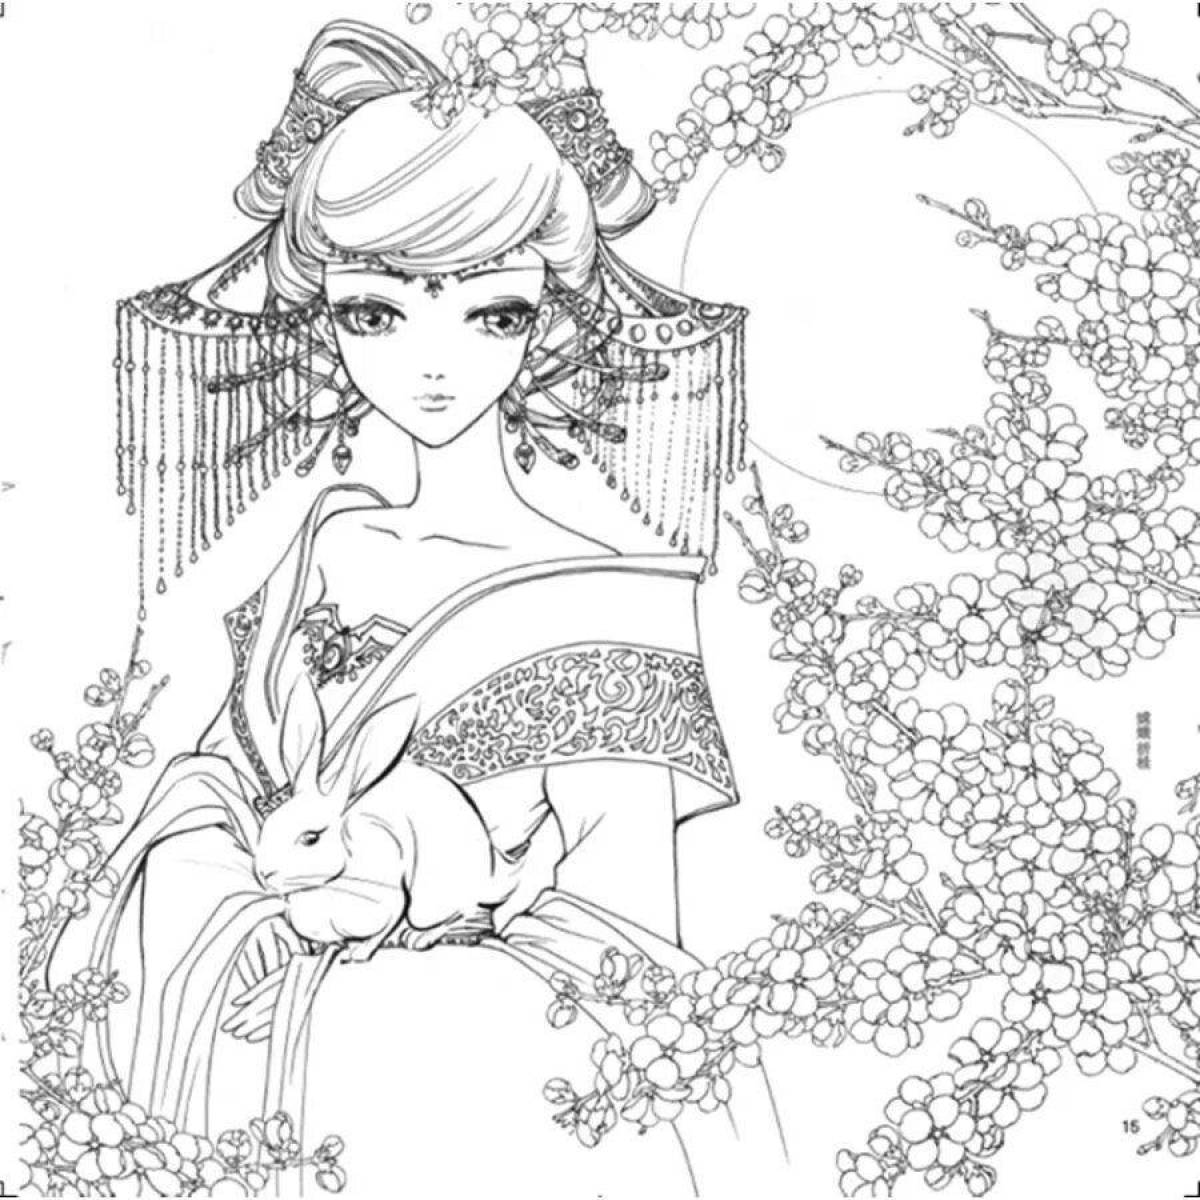 Fabulous Chinese coloring book